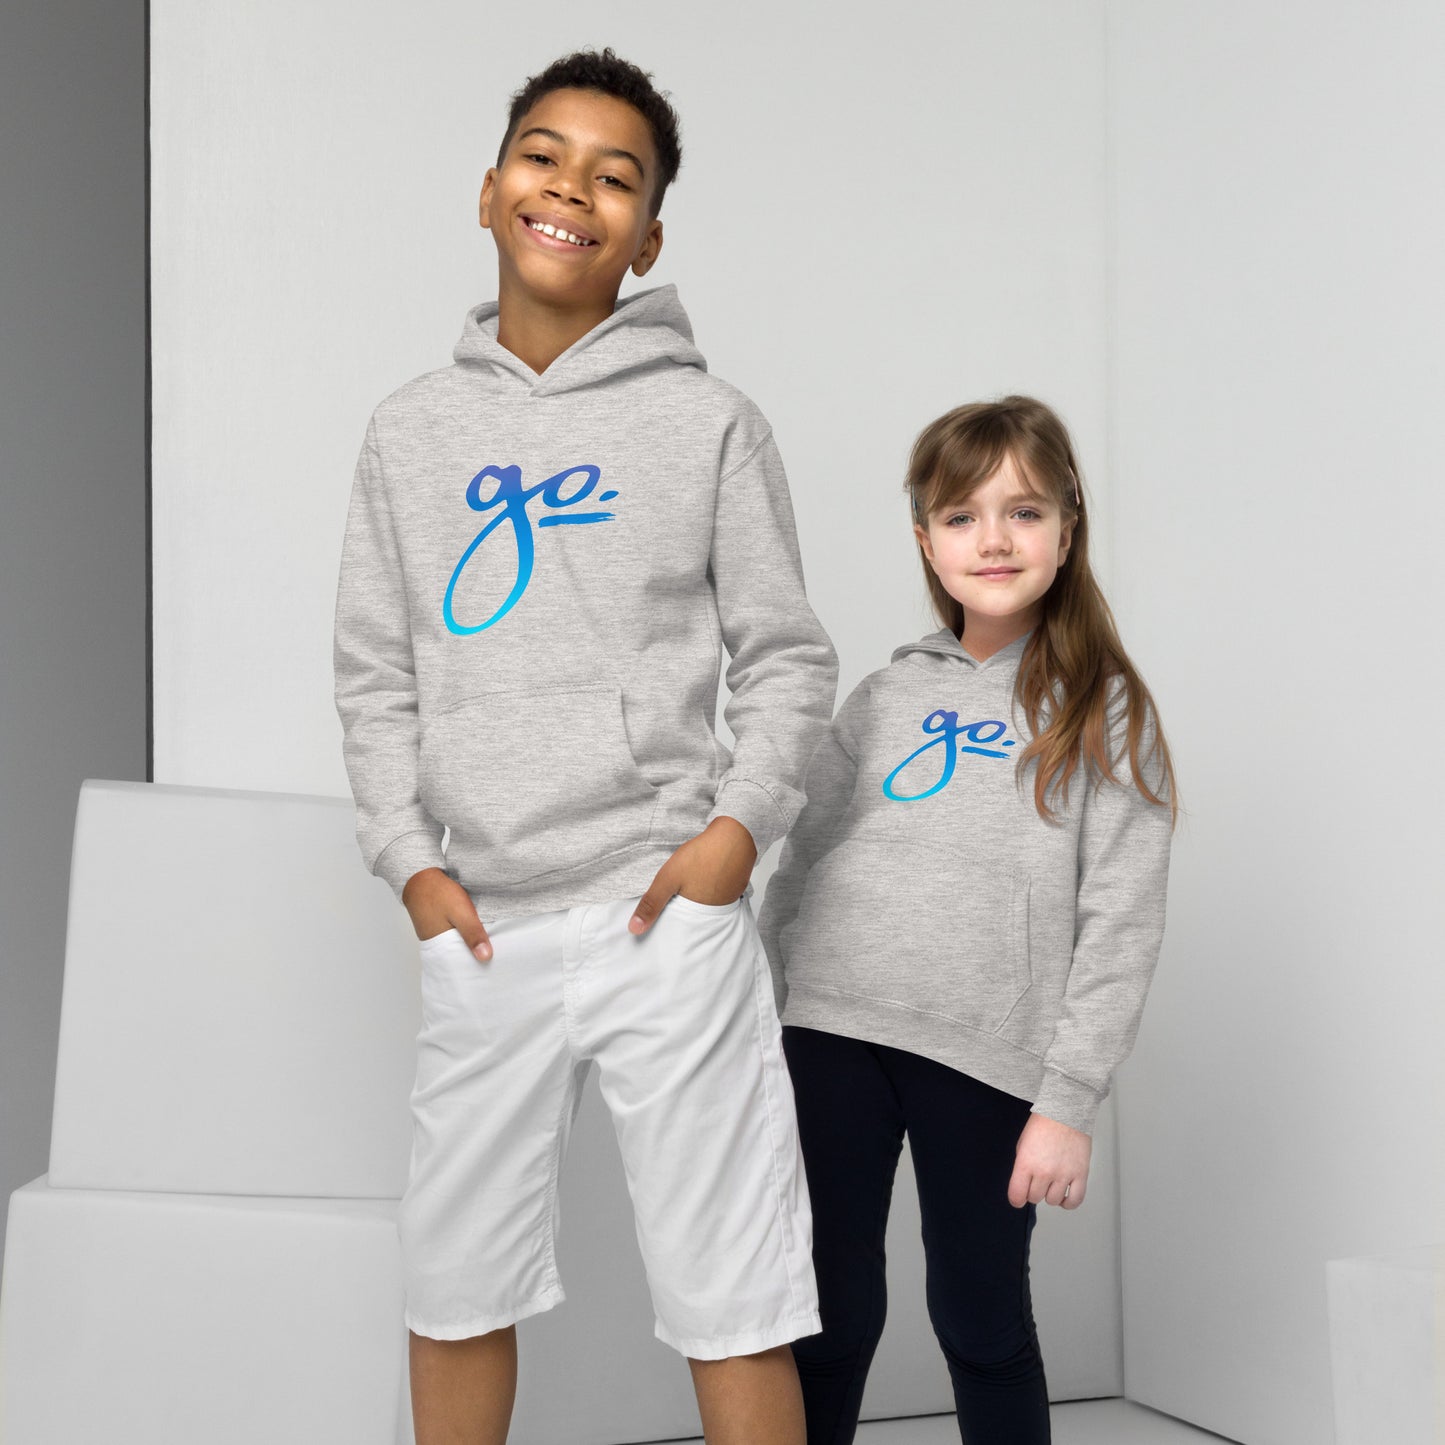 Go. Youth Hoodie